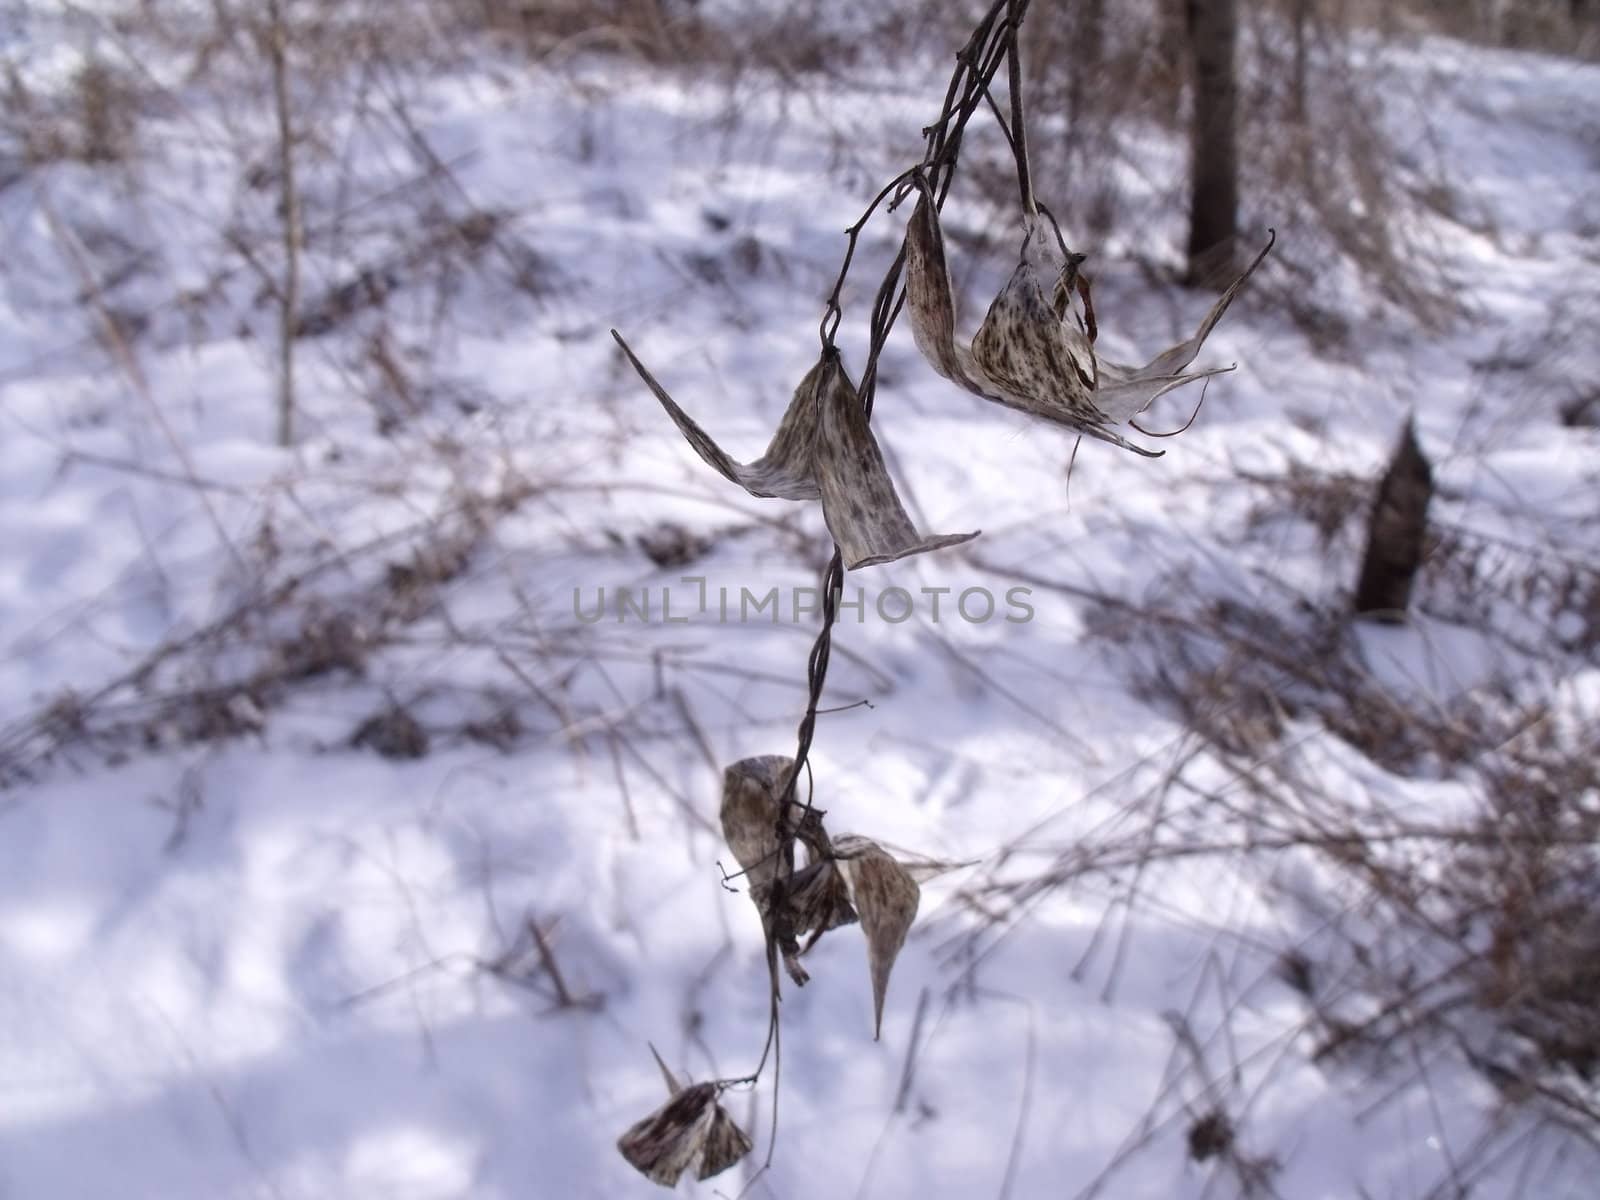 Lifeless leaves in winter by WarburtonPhotos